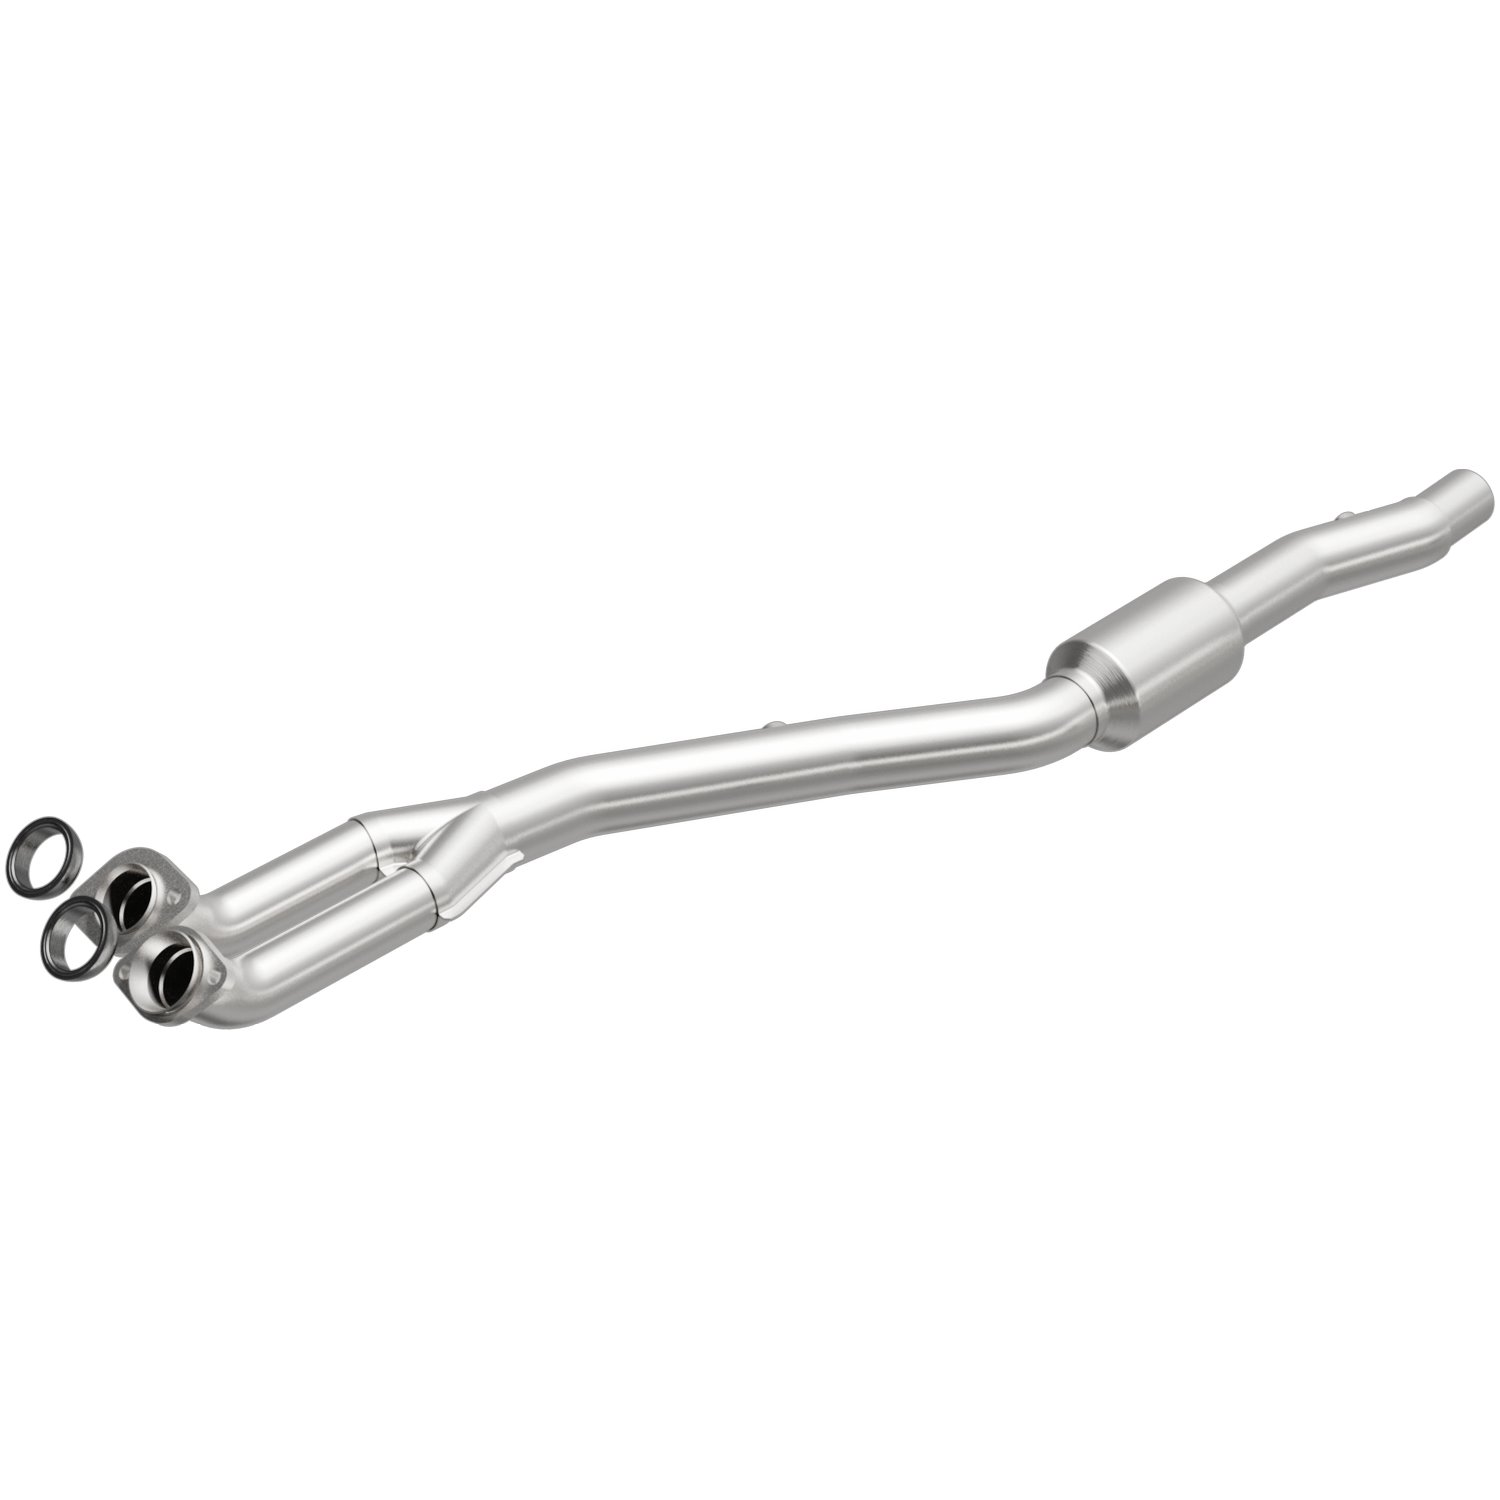 HM Grade Federal / EPA Compliant Direct-Fit Catalytic Converter 23058